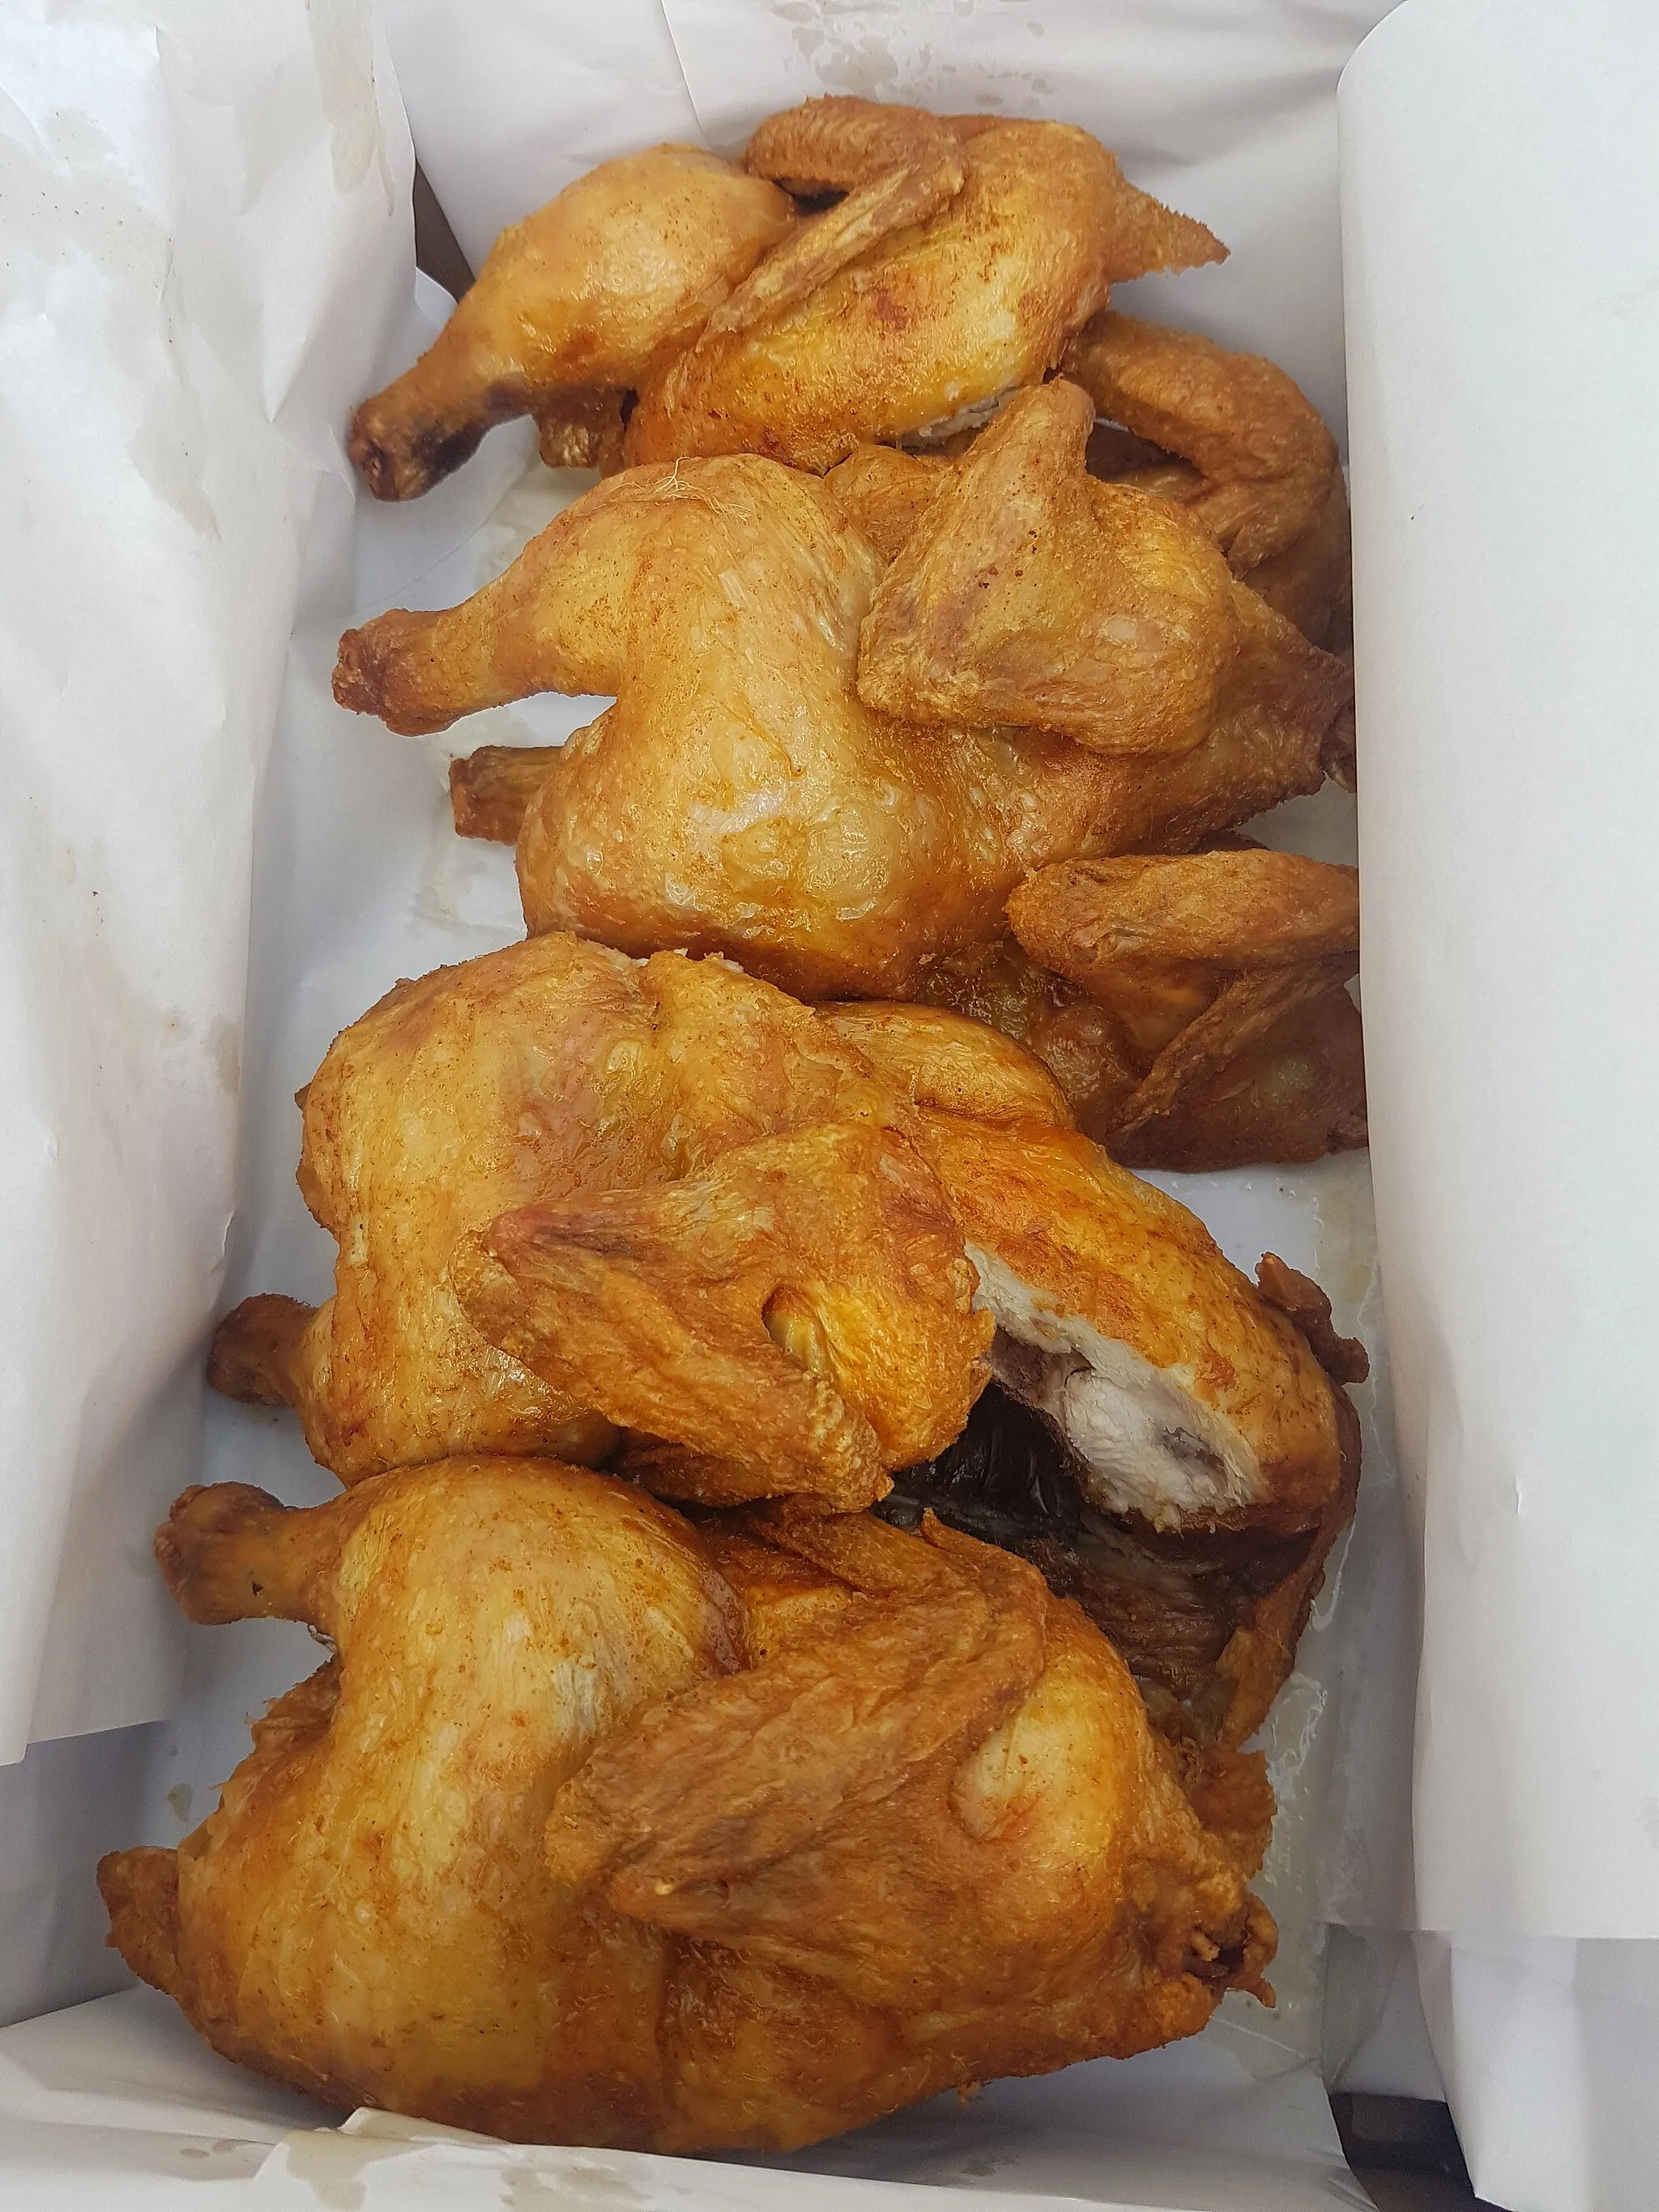 Photo showing: Four half roasted chickens in a box.